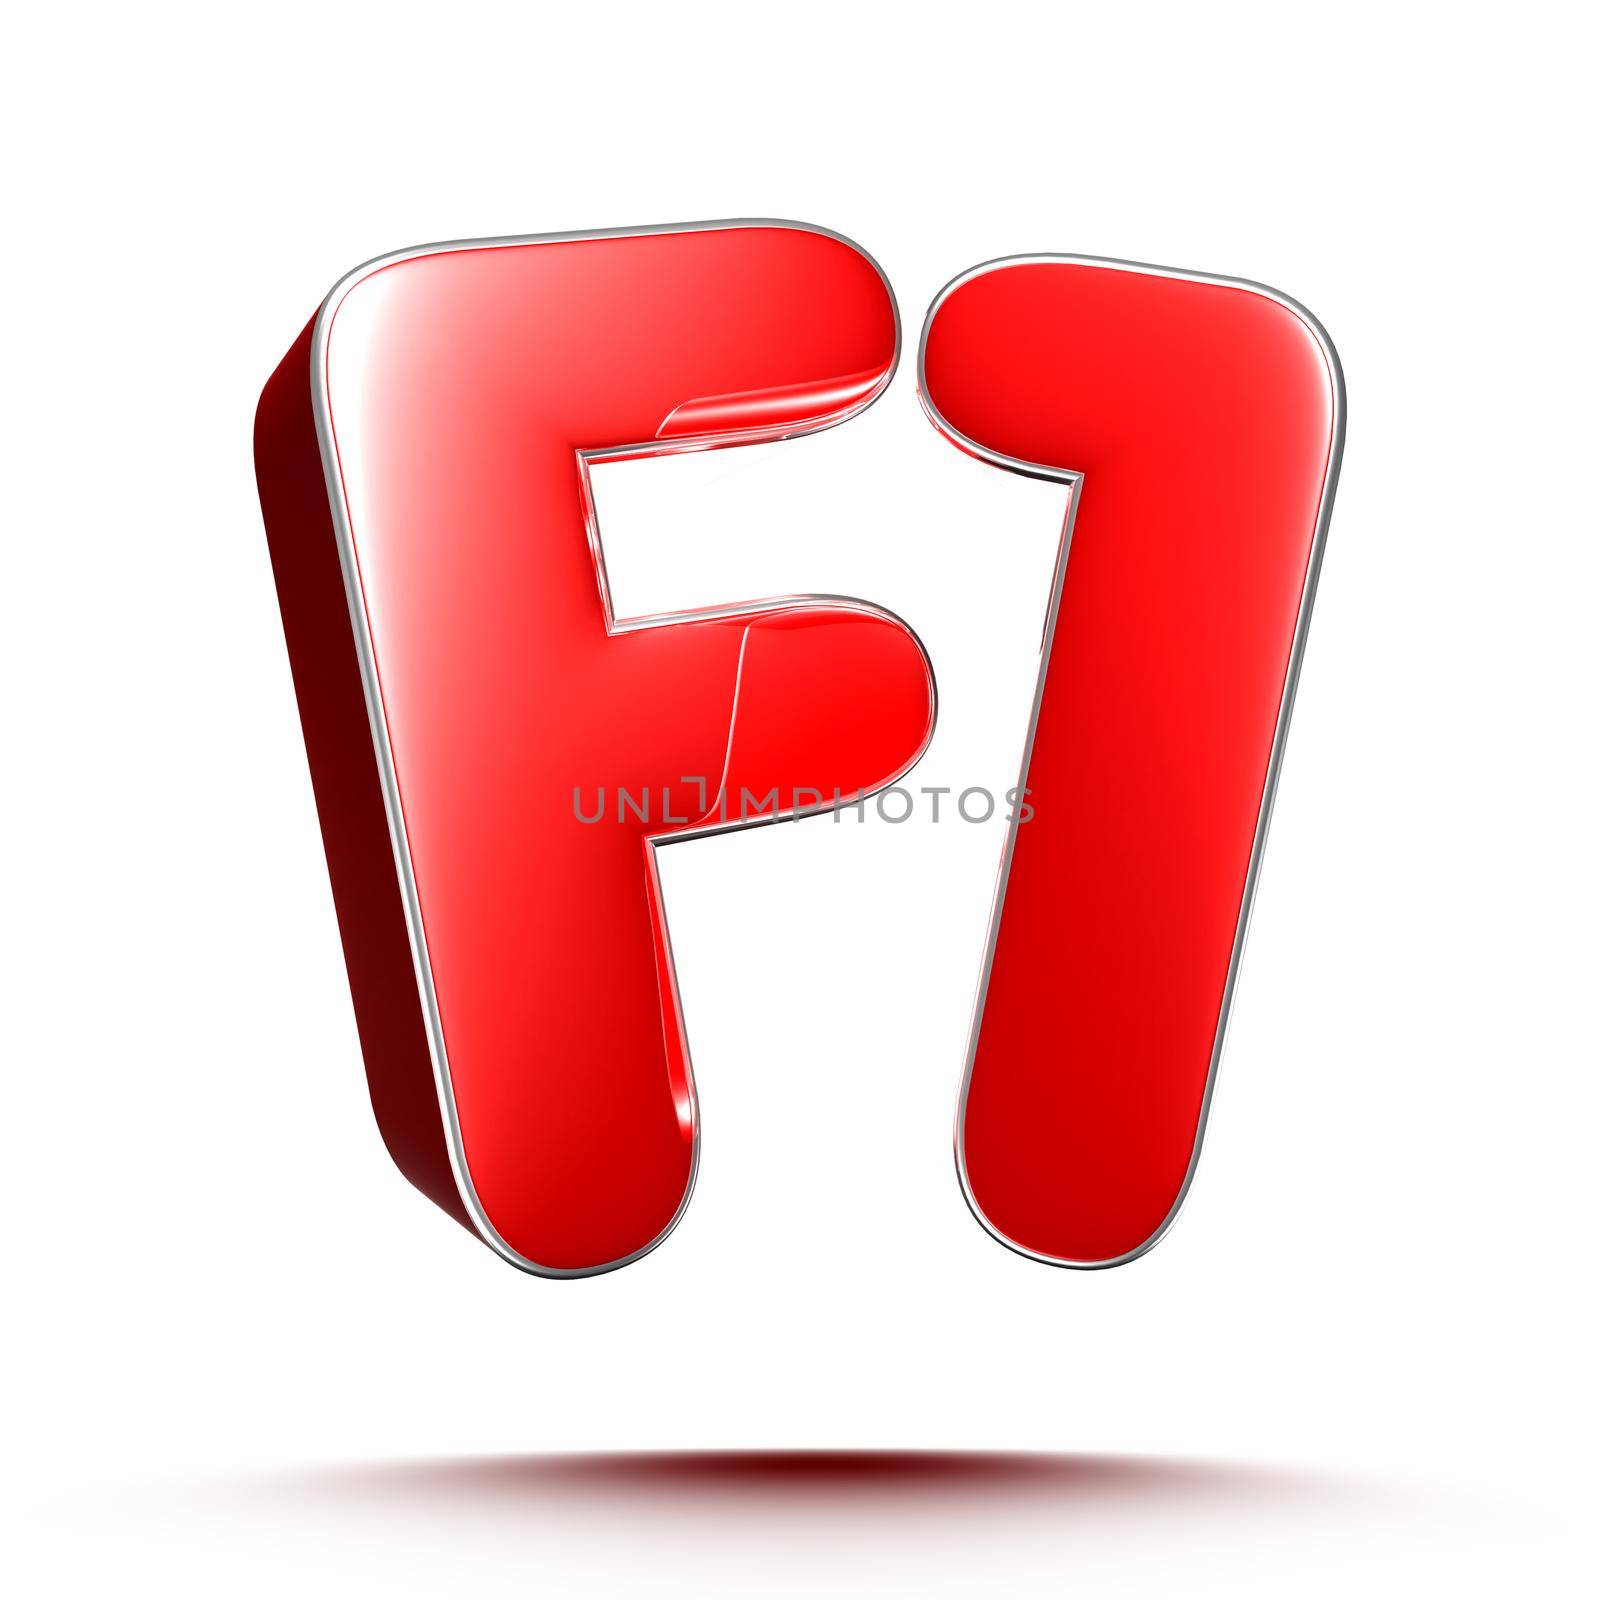 F1 red 3D illustration on white background with clipping path. by thitimontoyai